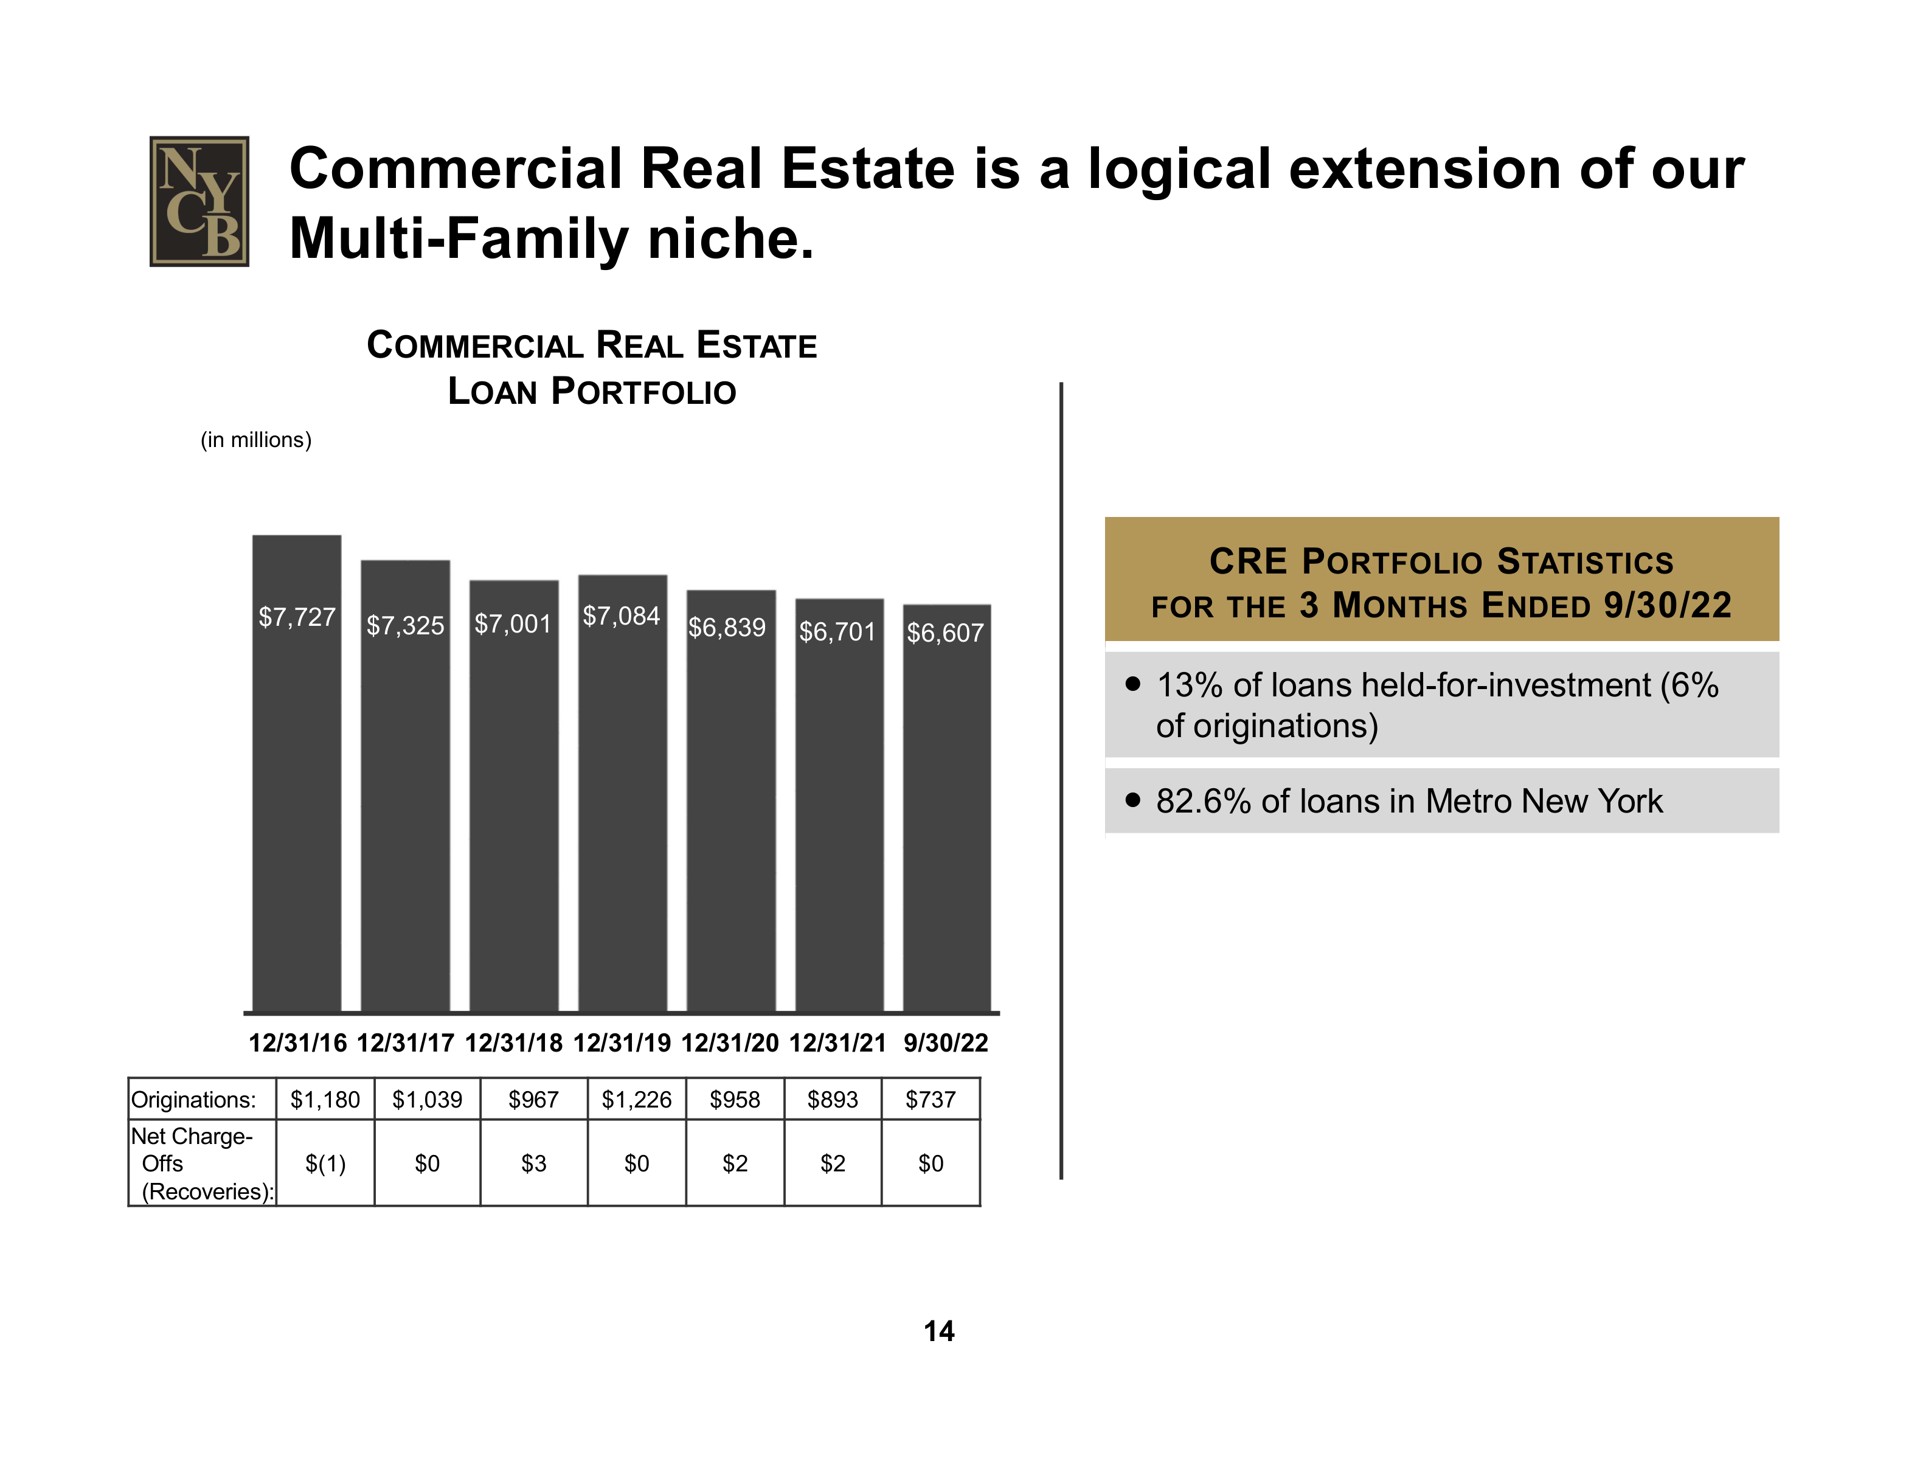 commercial real estate is a logical extension of our family niche | New York Community Bancorp